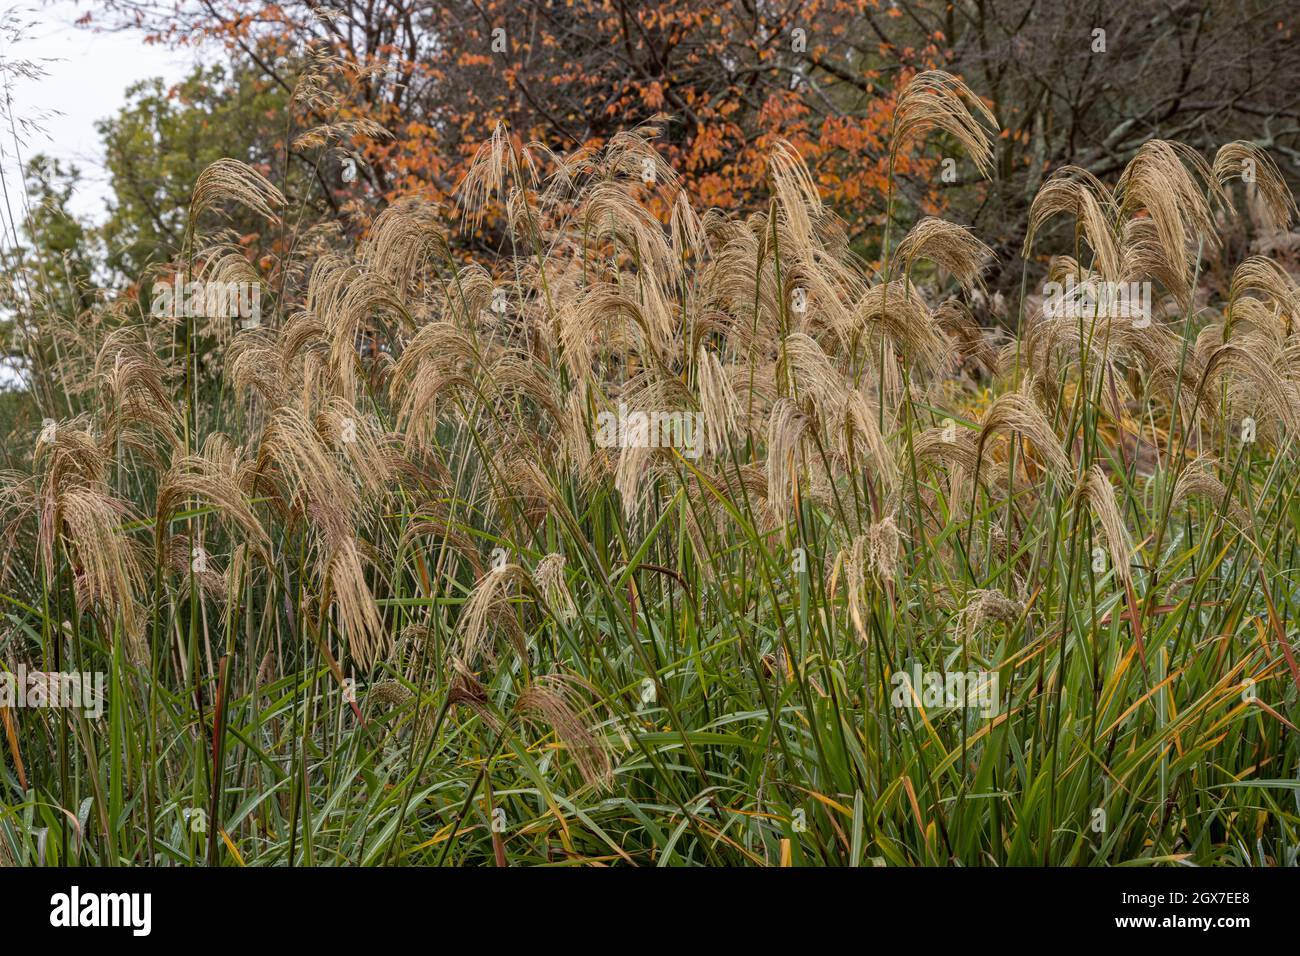 Miscanthus nepalensis in flower in the atumn Stock Photo